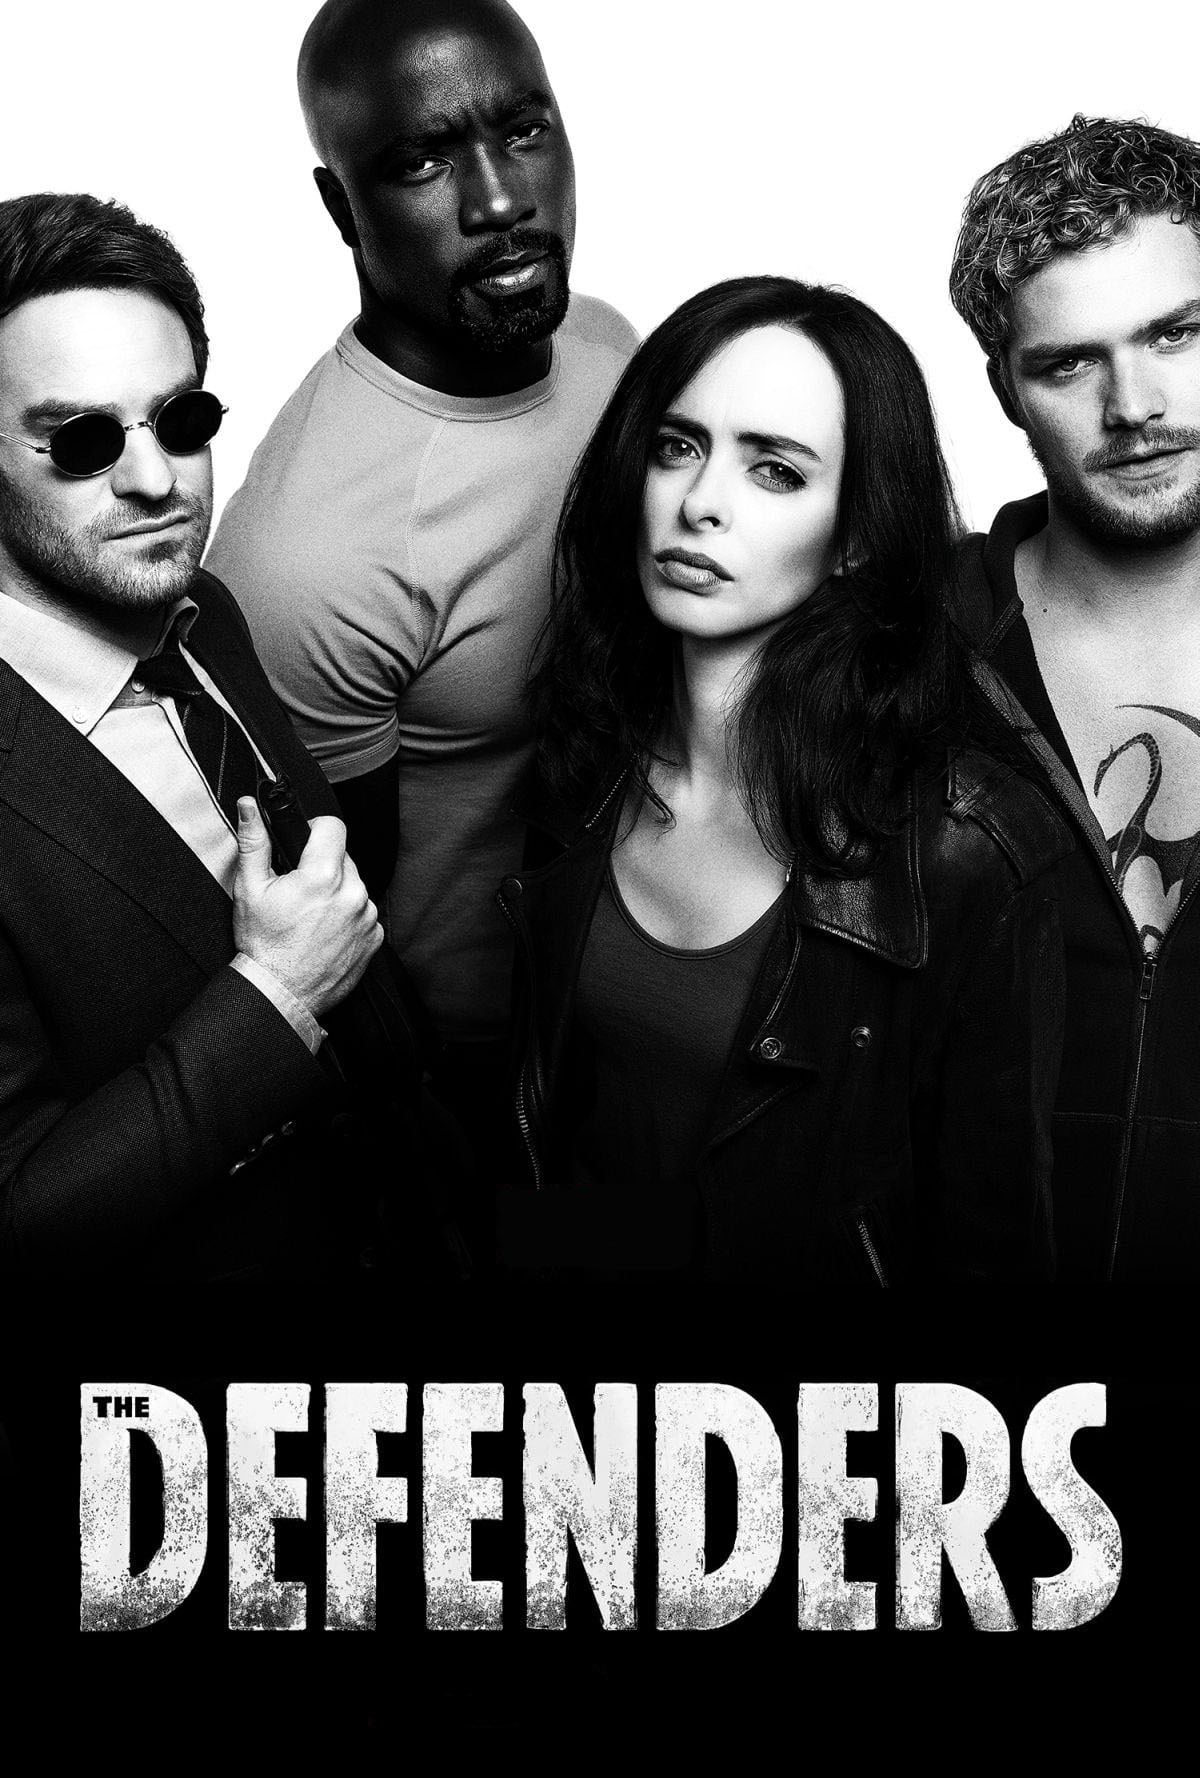 Marvel’s The Defenders (Season 1) Complete English WEB-DL 1080p 720p & 480p x264 HD [ALL Episodes] | Netflix Series